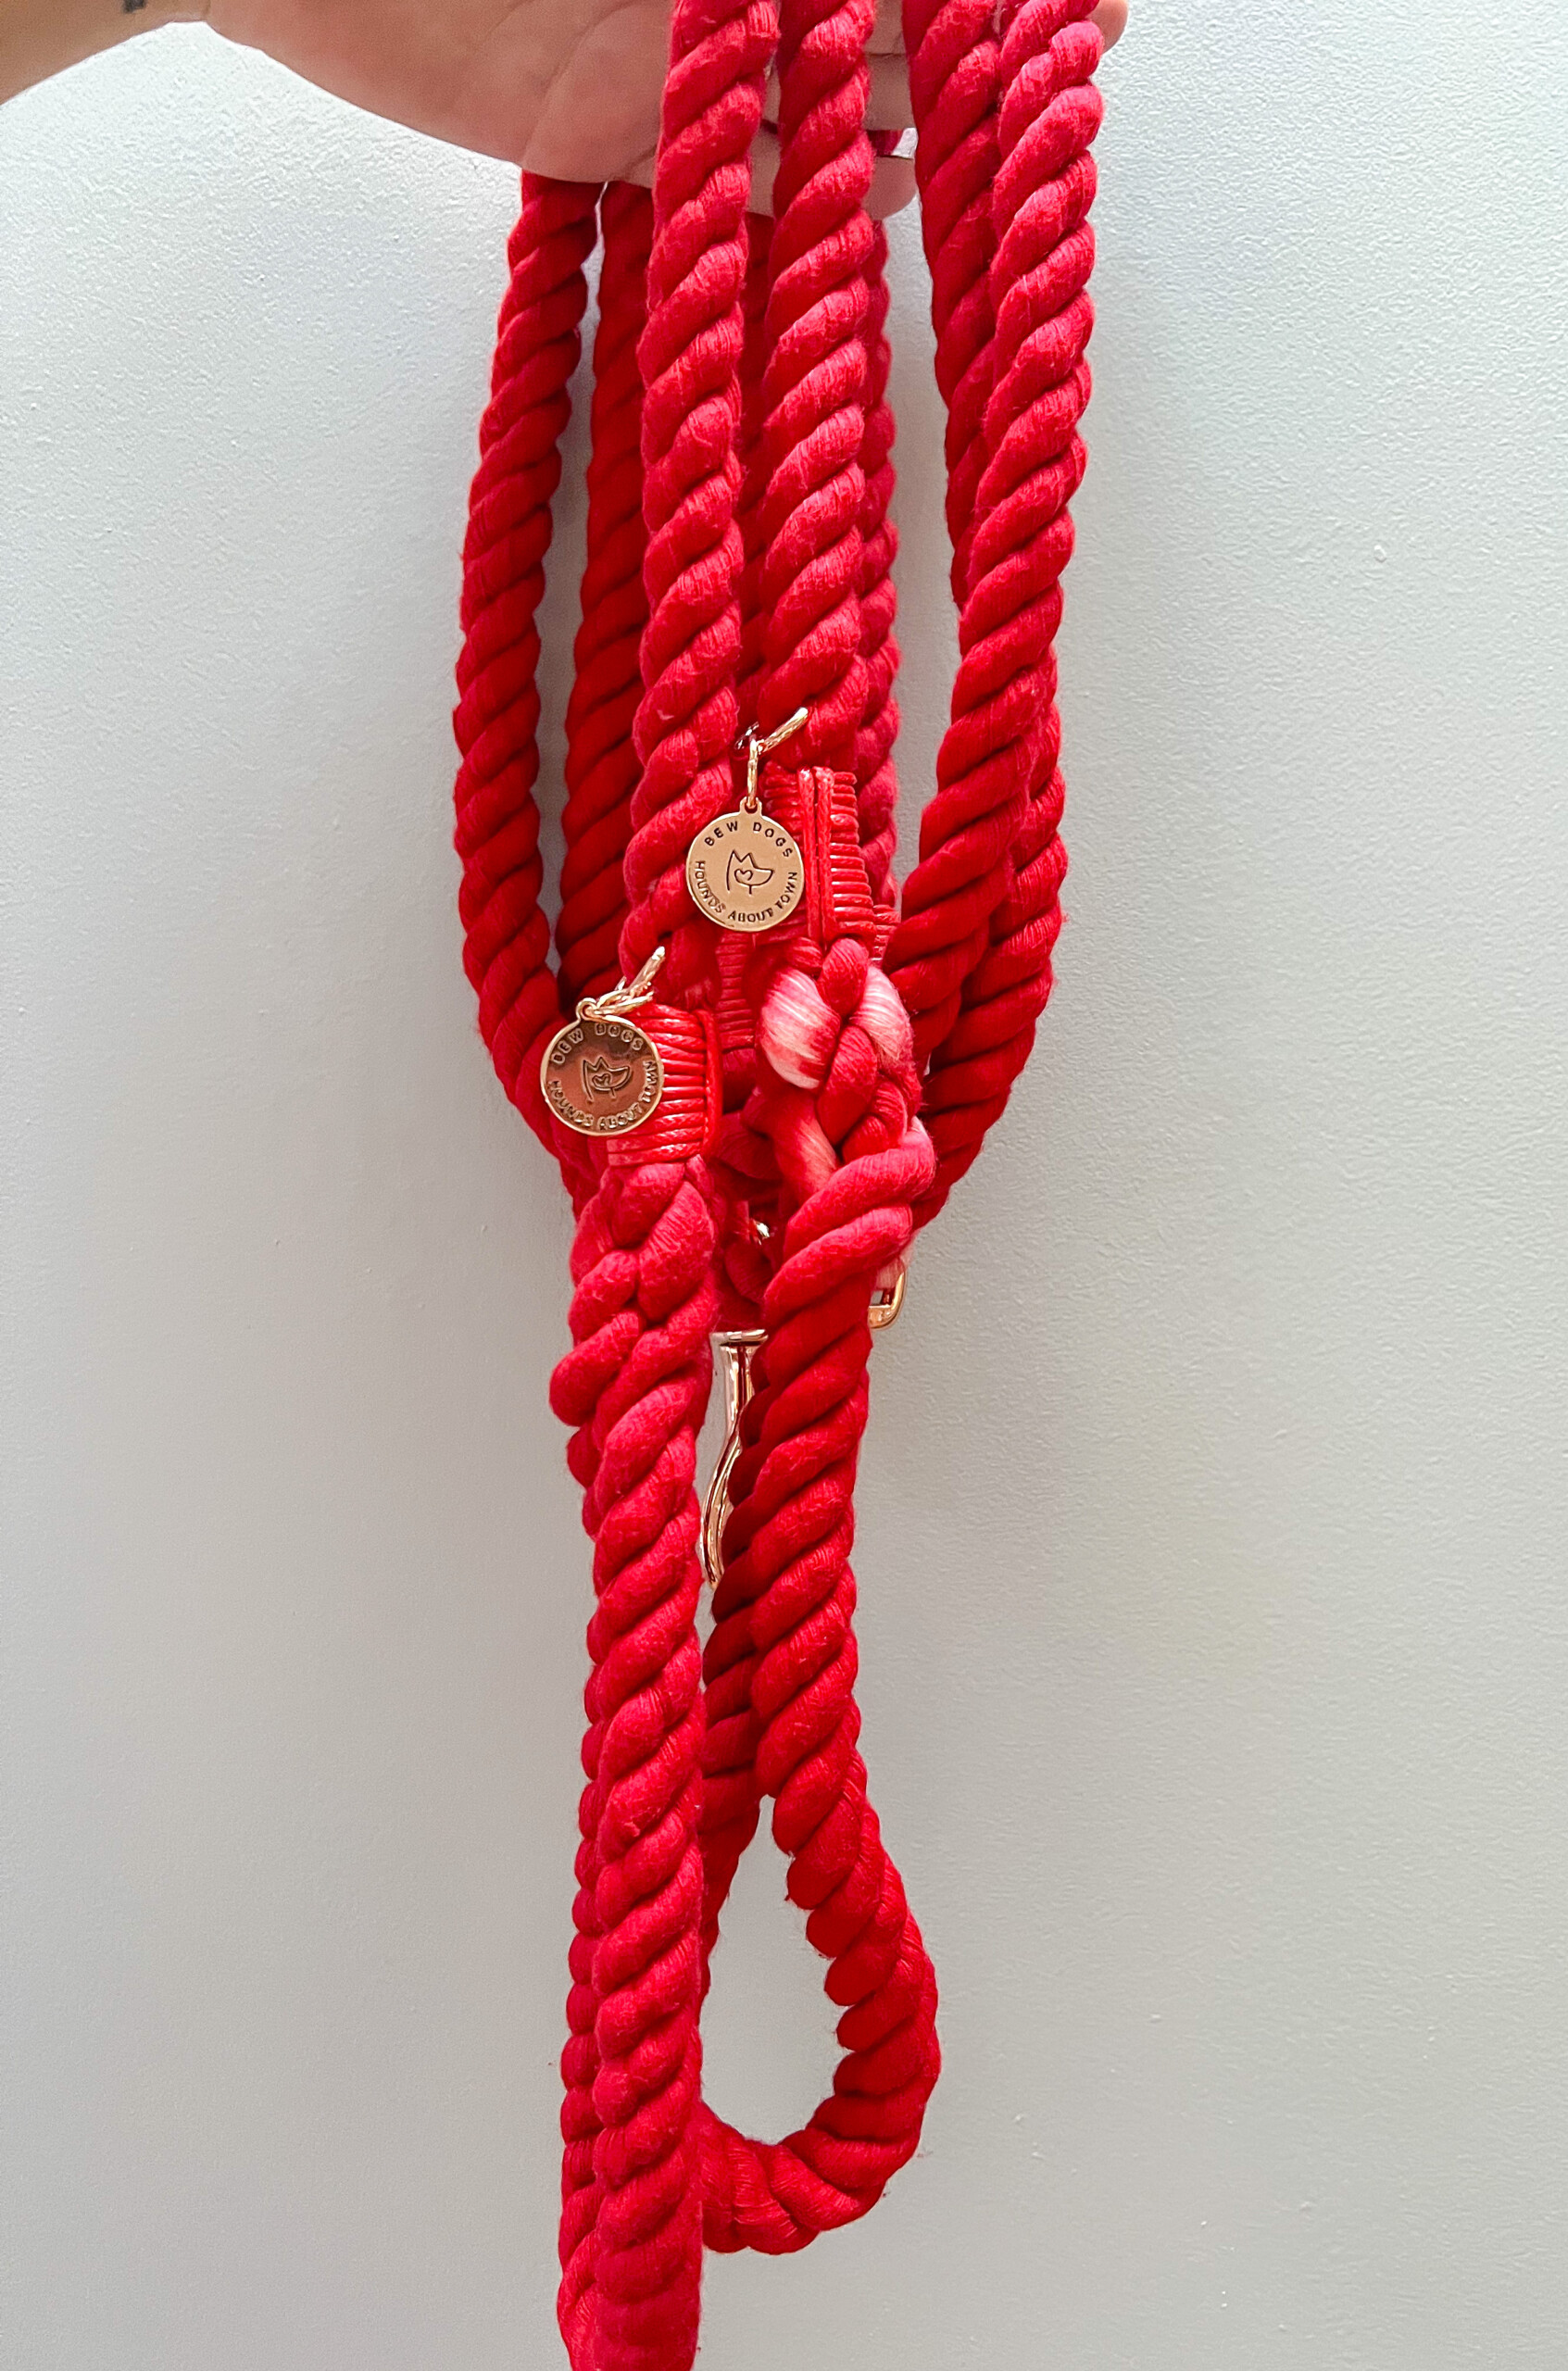 A red luxury rope lead, being held by a woman with deep and dark red painted nails against a grey painted wall